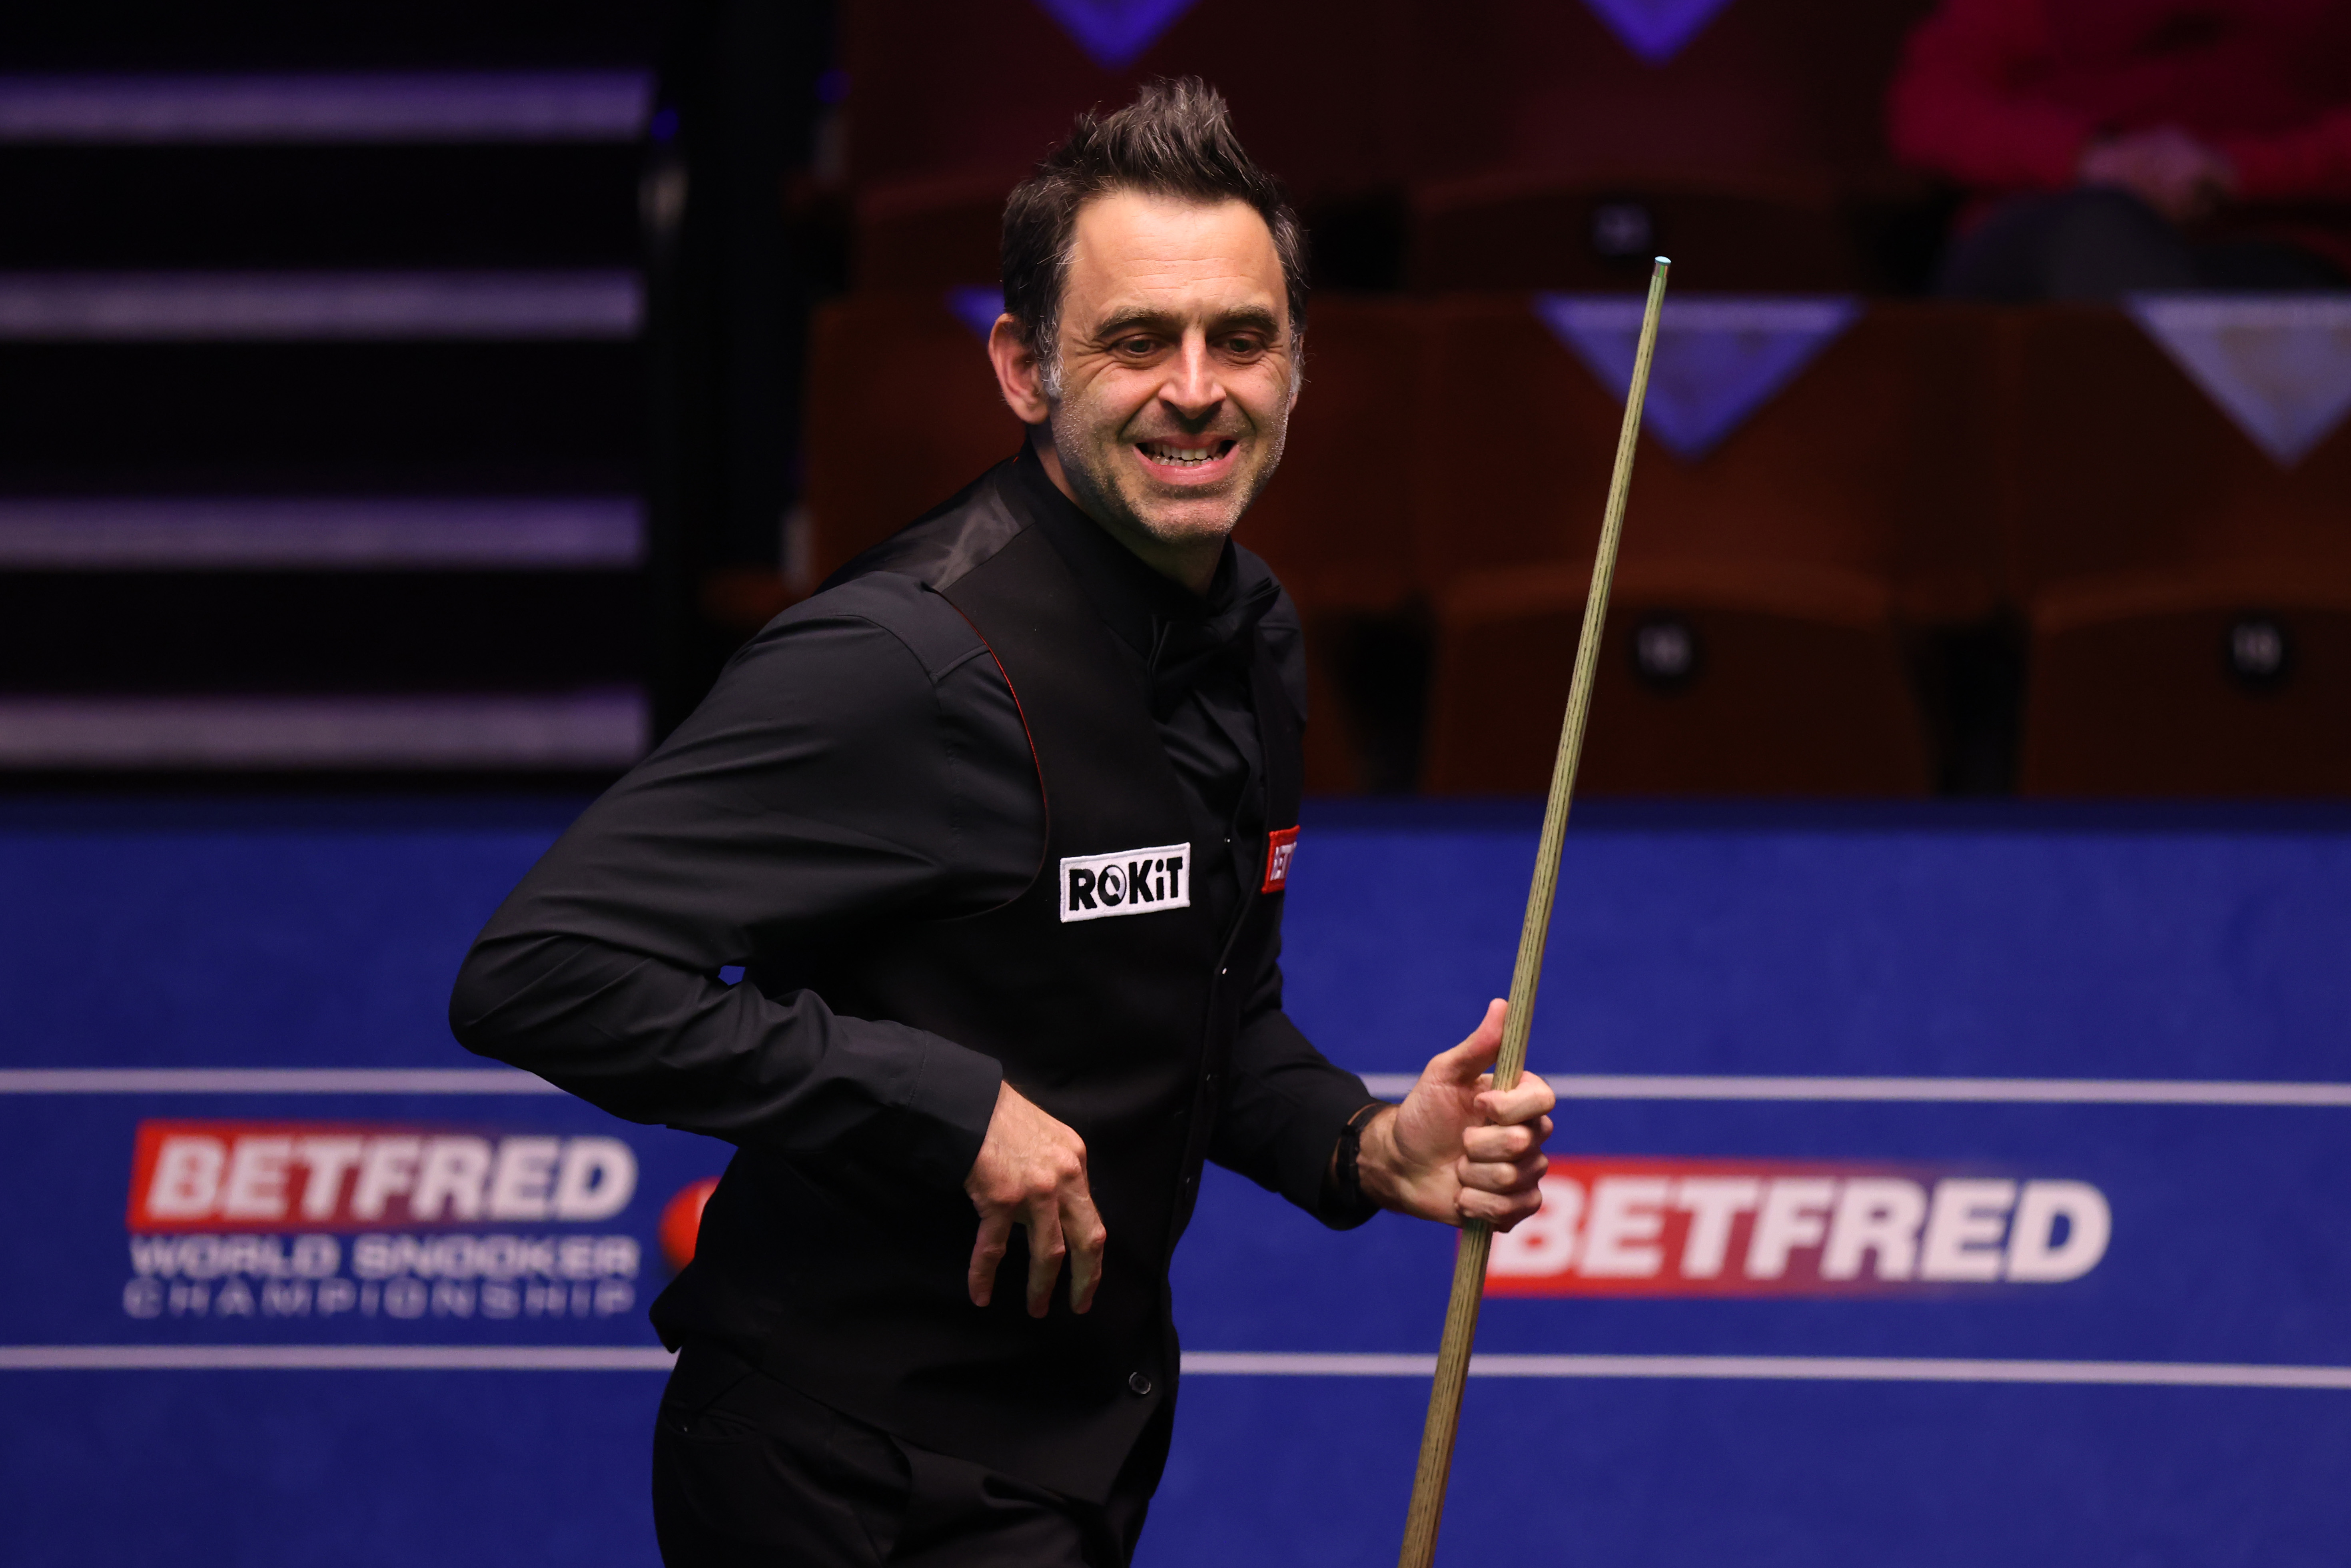 Ronnie OSullivan net worth and career earnings detailed ahead of World Snooker Championship 2022